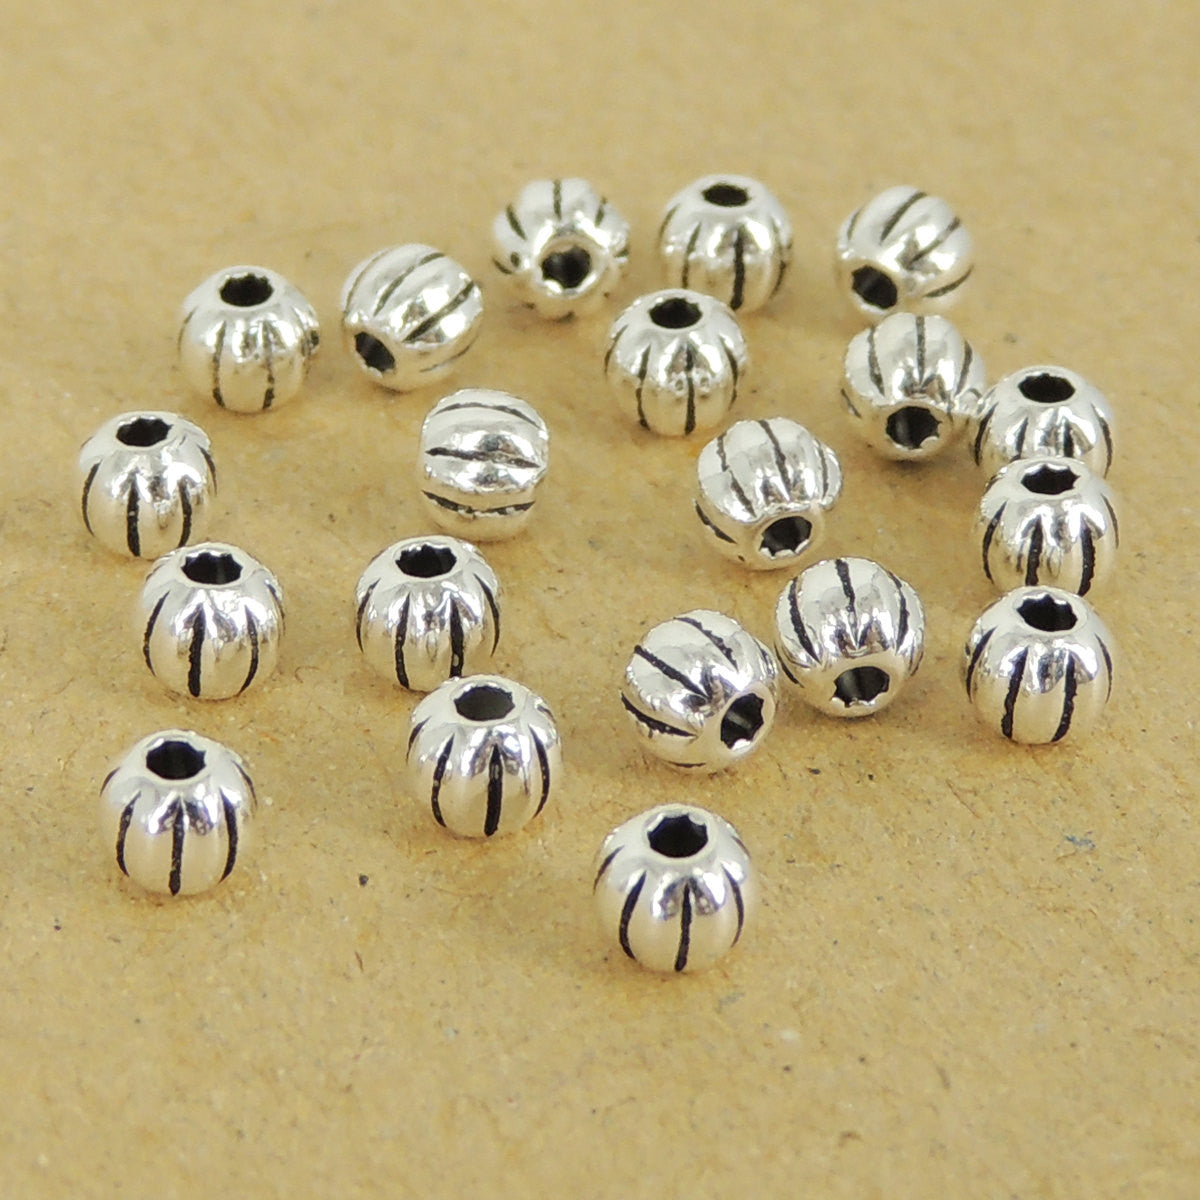 20 PCS Round Vintage Spacer Beads - S925 Sterling Silver WSP014X20